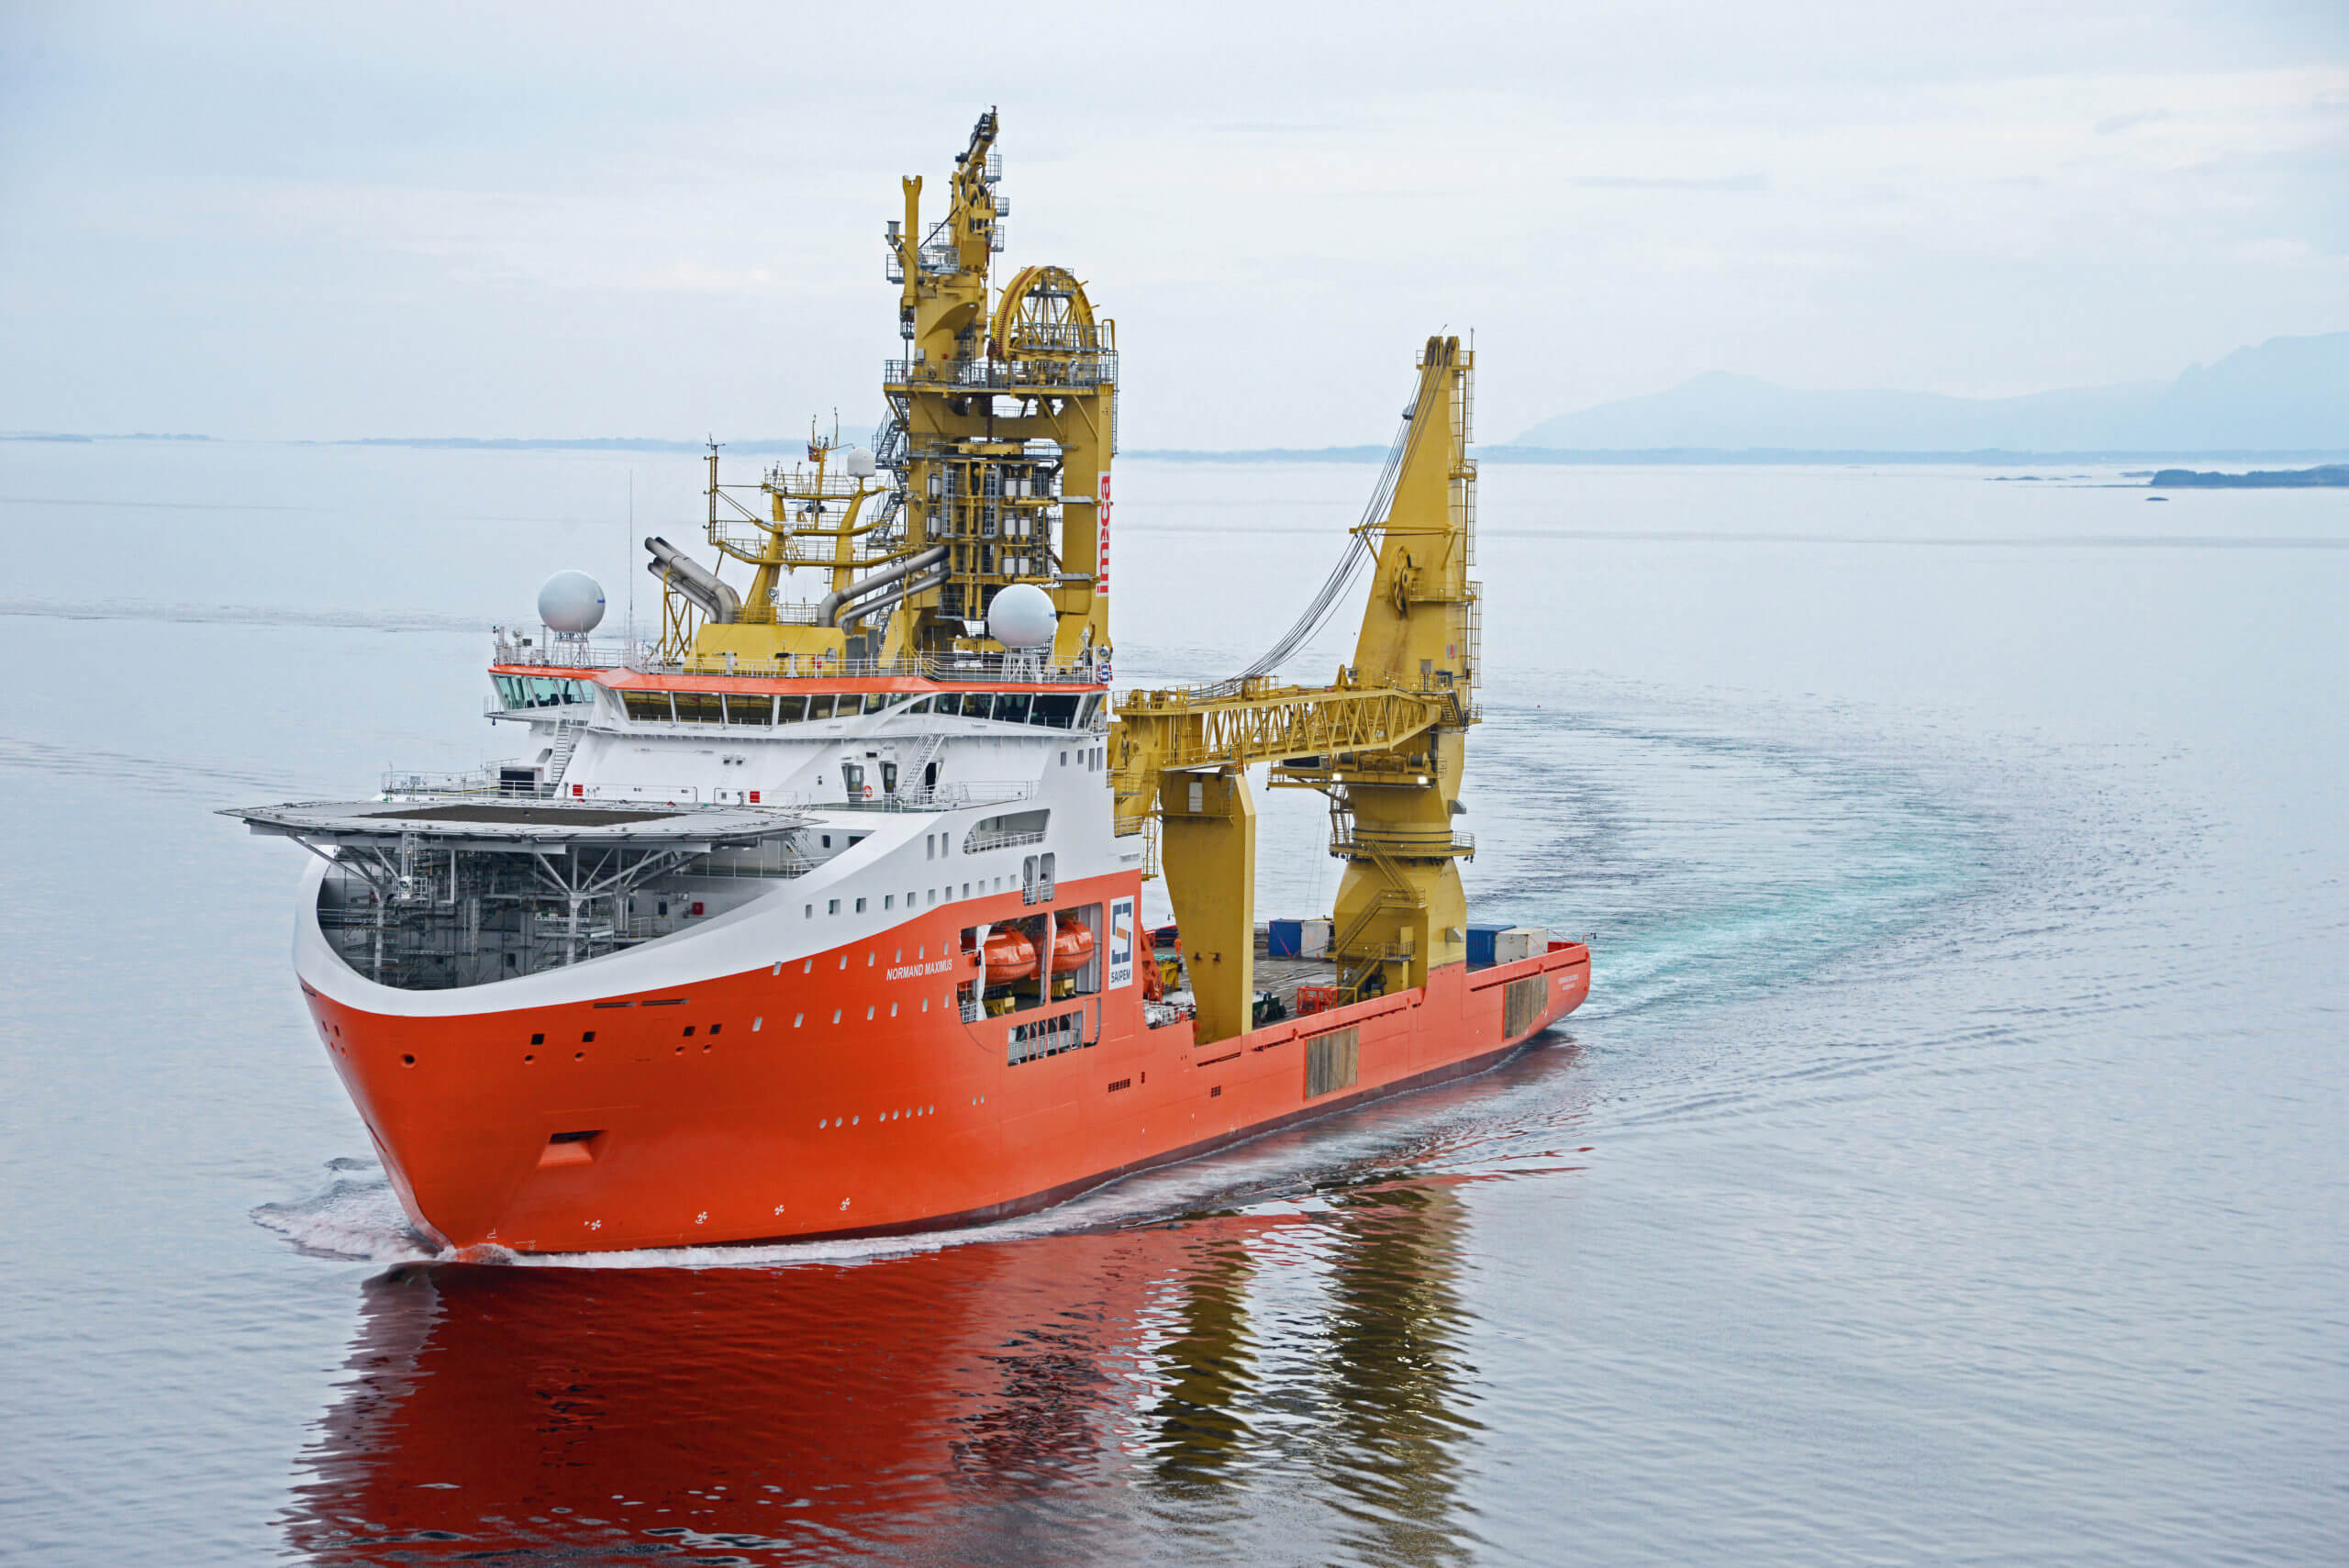 Solstad Offshore chooses Profitbase Risk Management to safeguard its values and assets